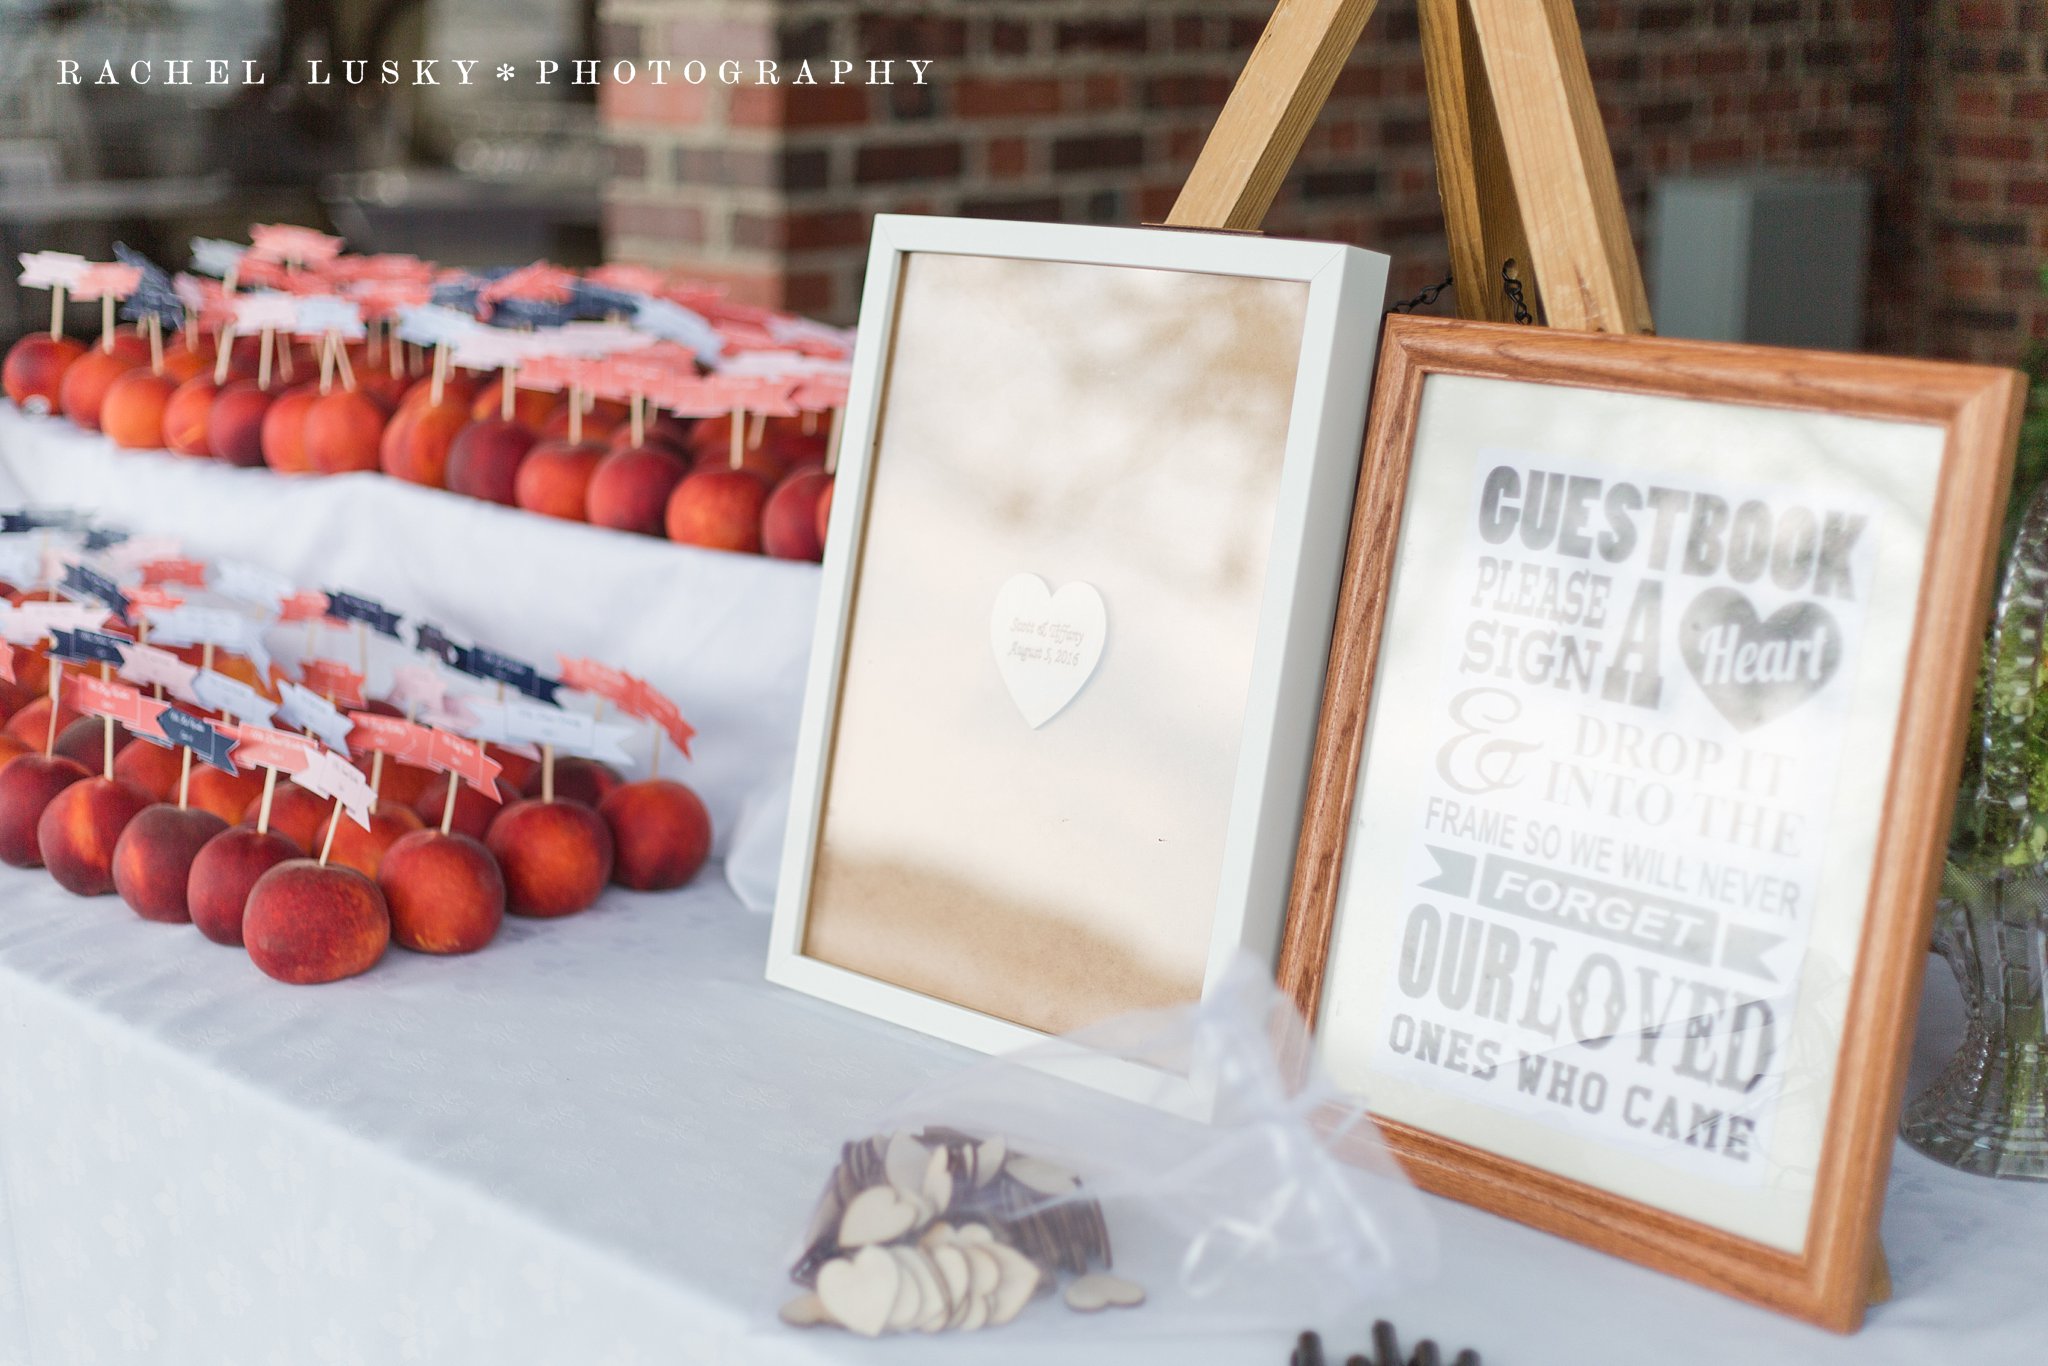 Conneaut Lake Wedding Photography, Iroquois Boat Club